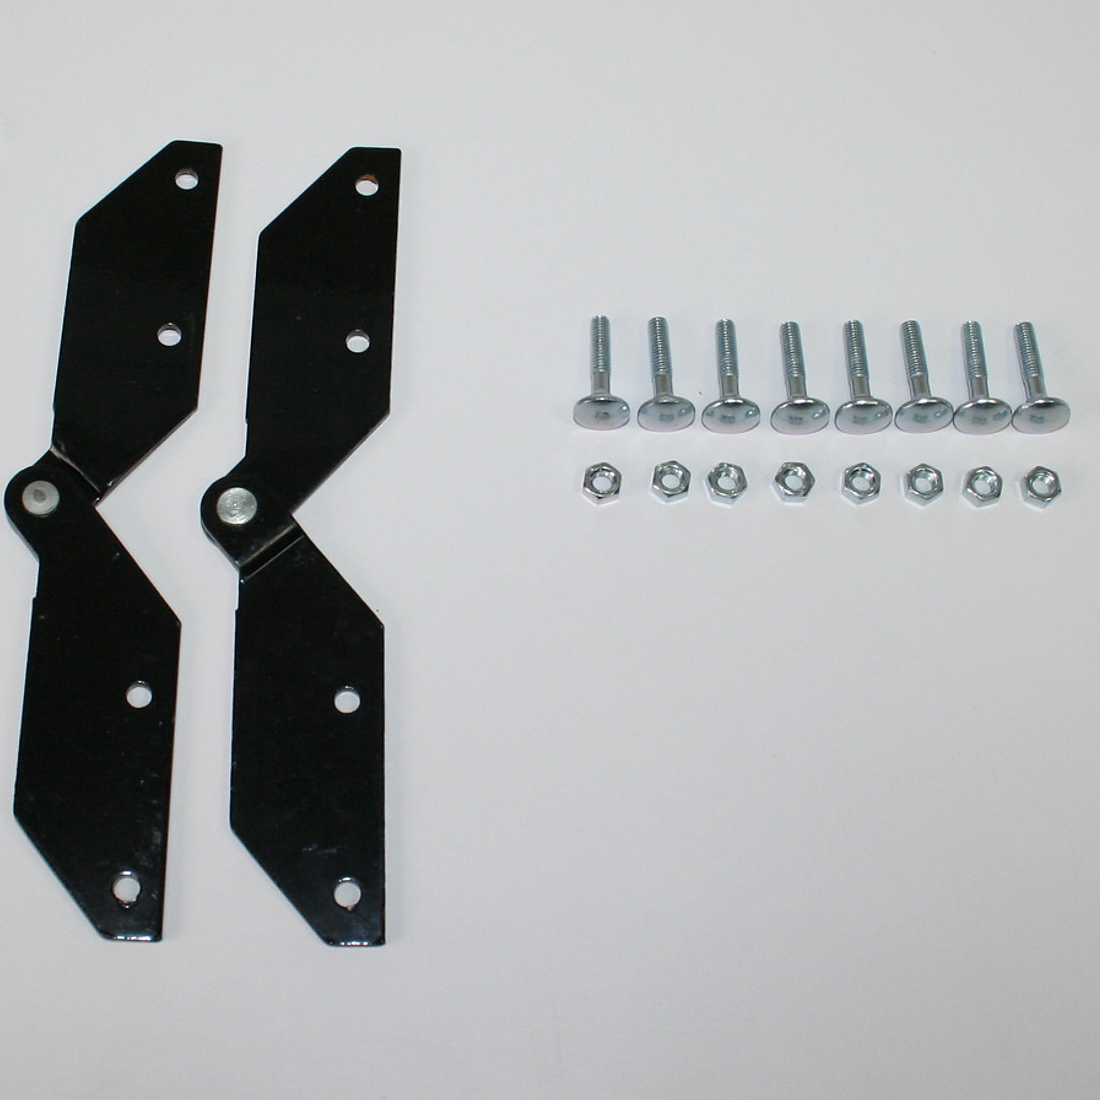 Hinge For Ladder Extension Section - 2 Pieces